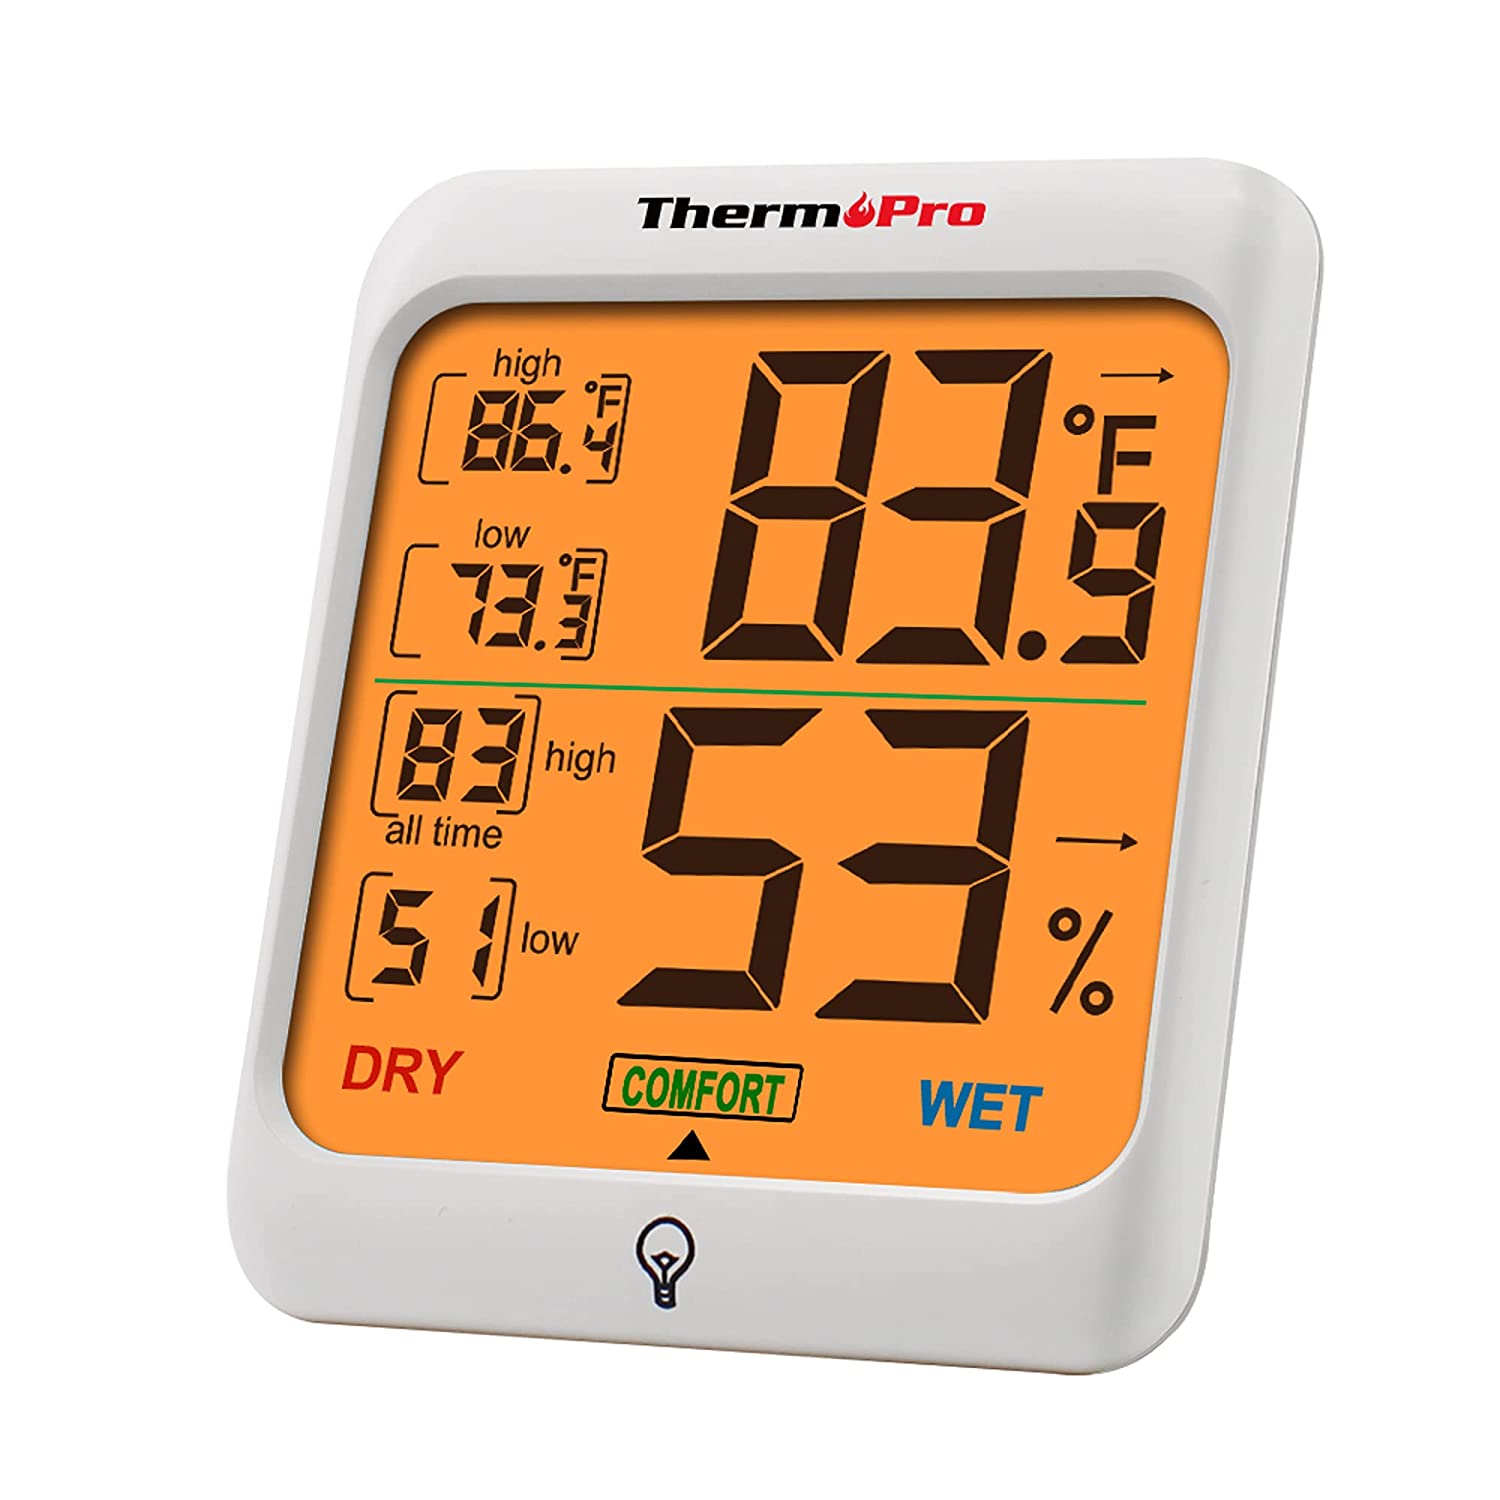 Introducing ThermoPro TP49 Digital Mini Indoor Thermometer